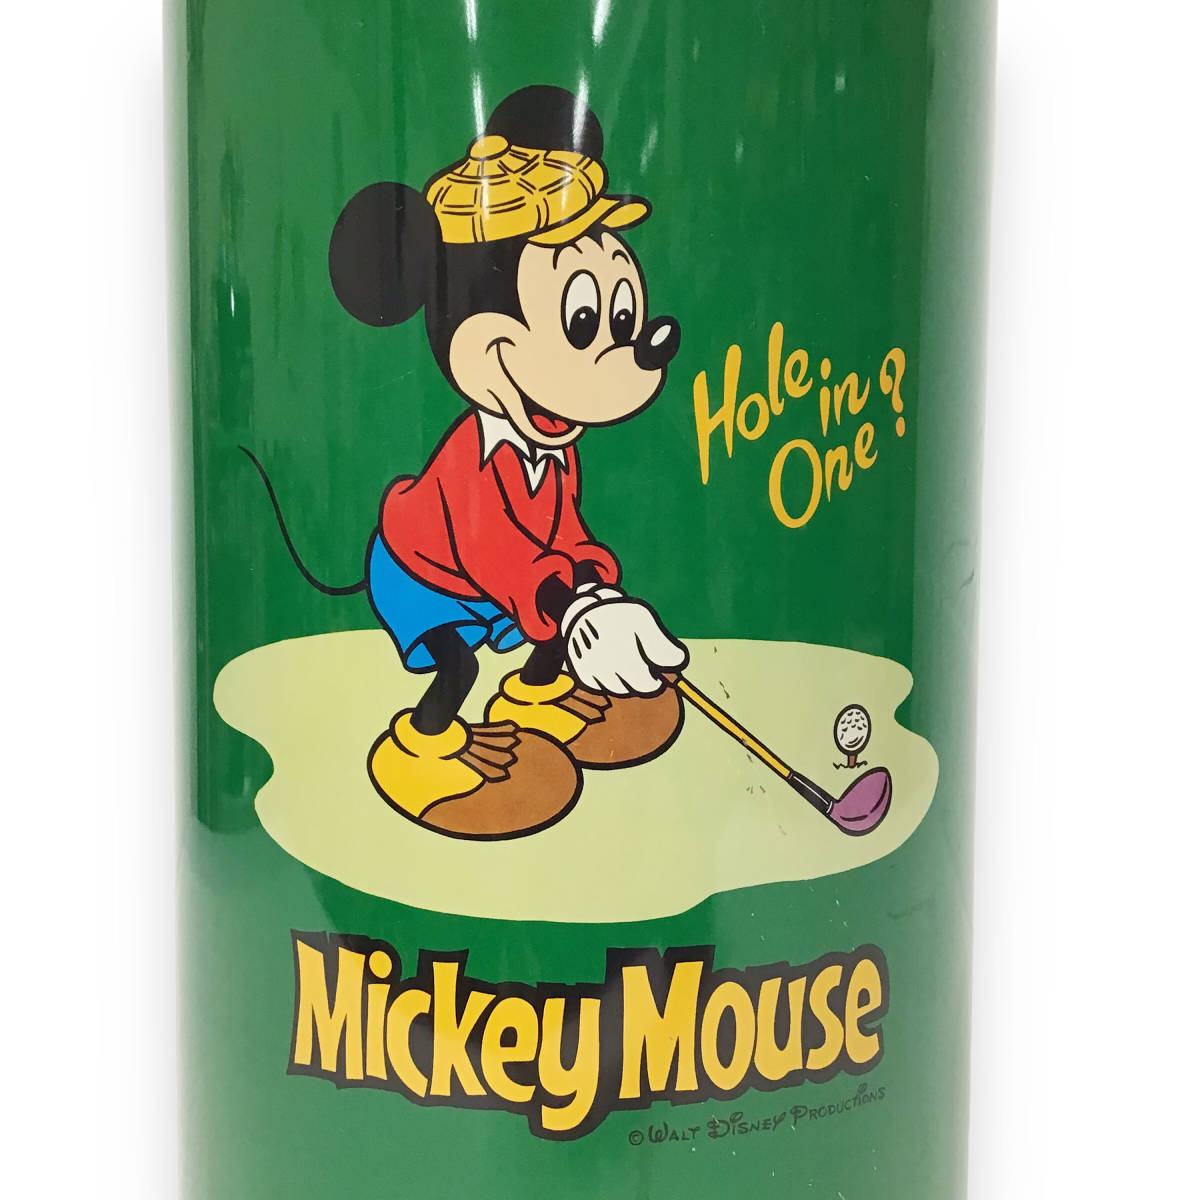 23Y405 3.... Mickey Mouse dumpster Disney steel made waste basket retro that time thing 